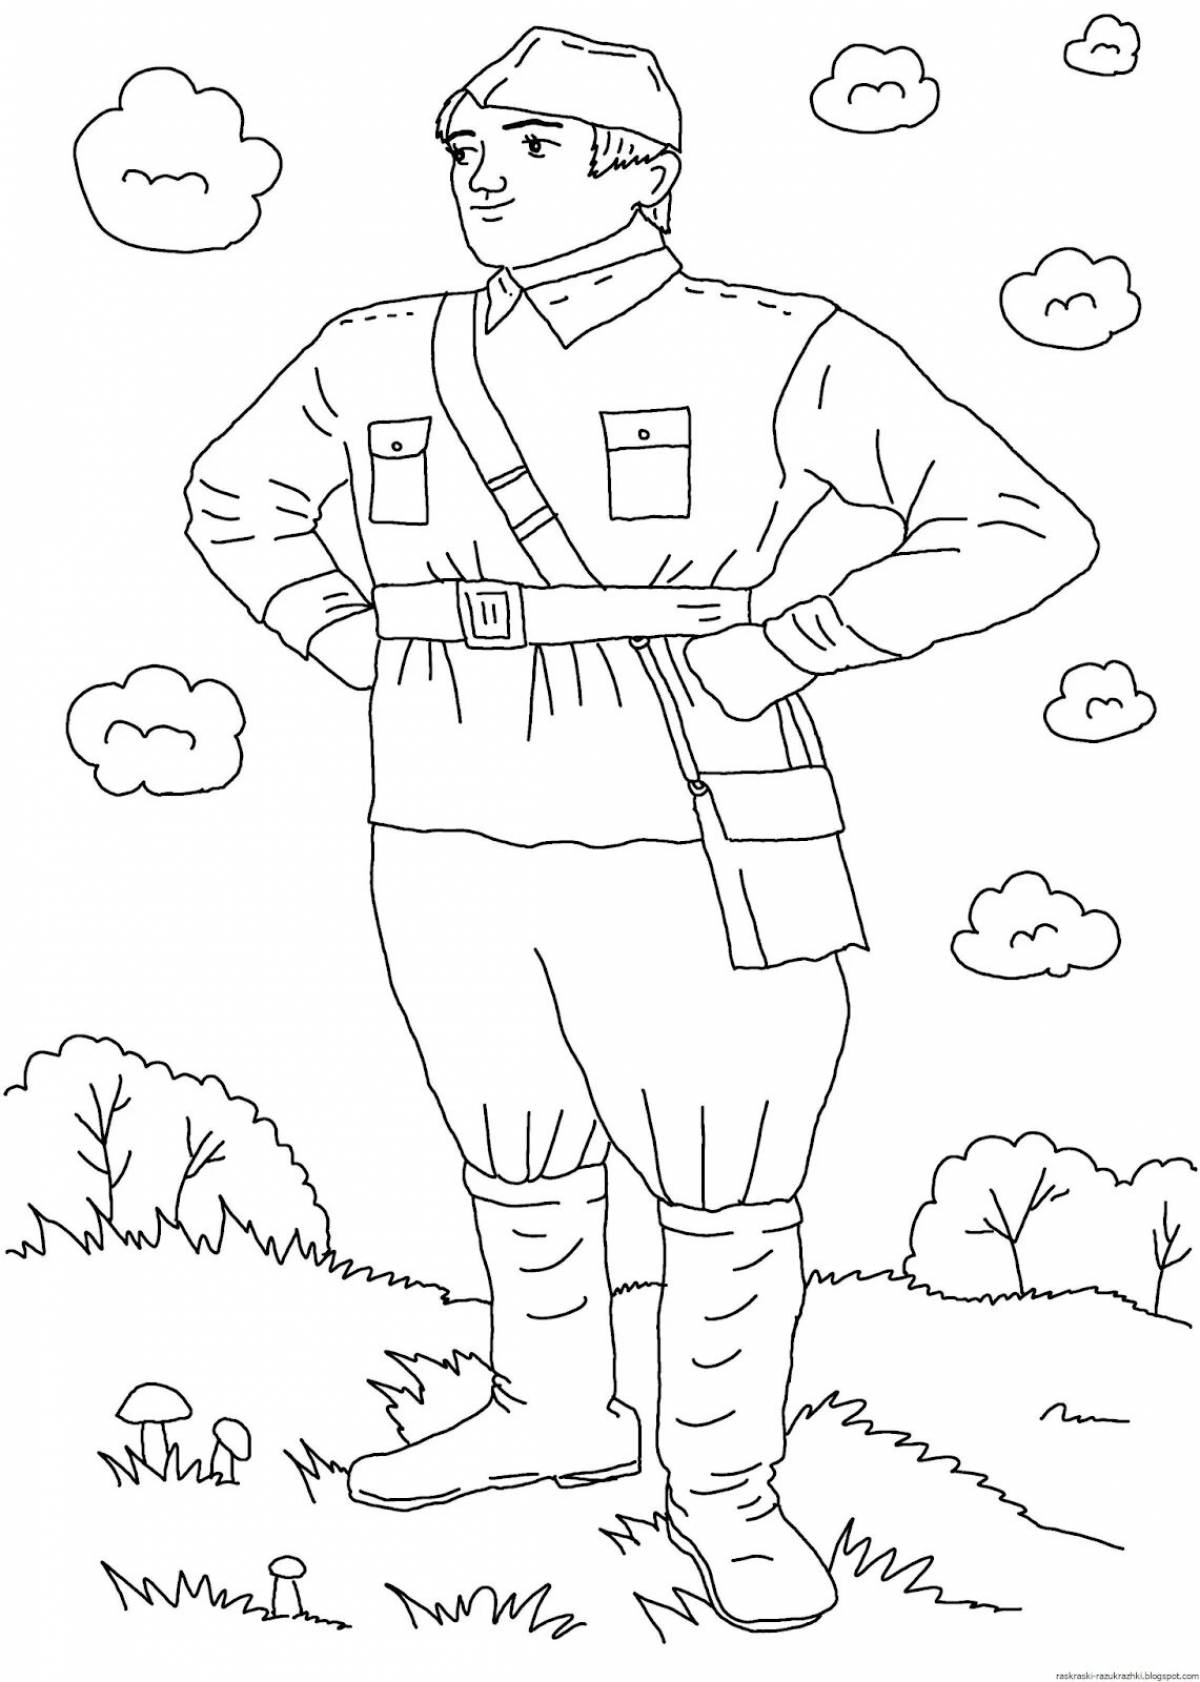 Wonderful War coloring pages for preschoolers